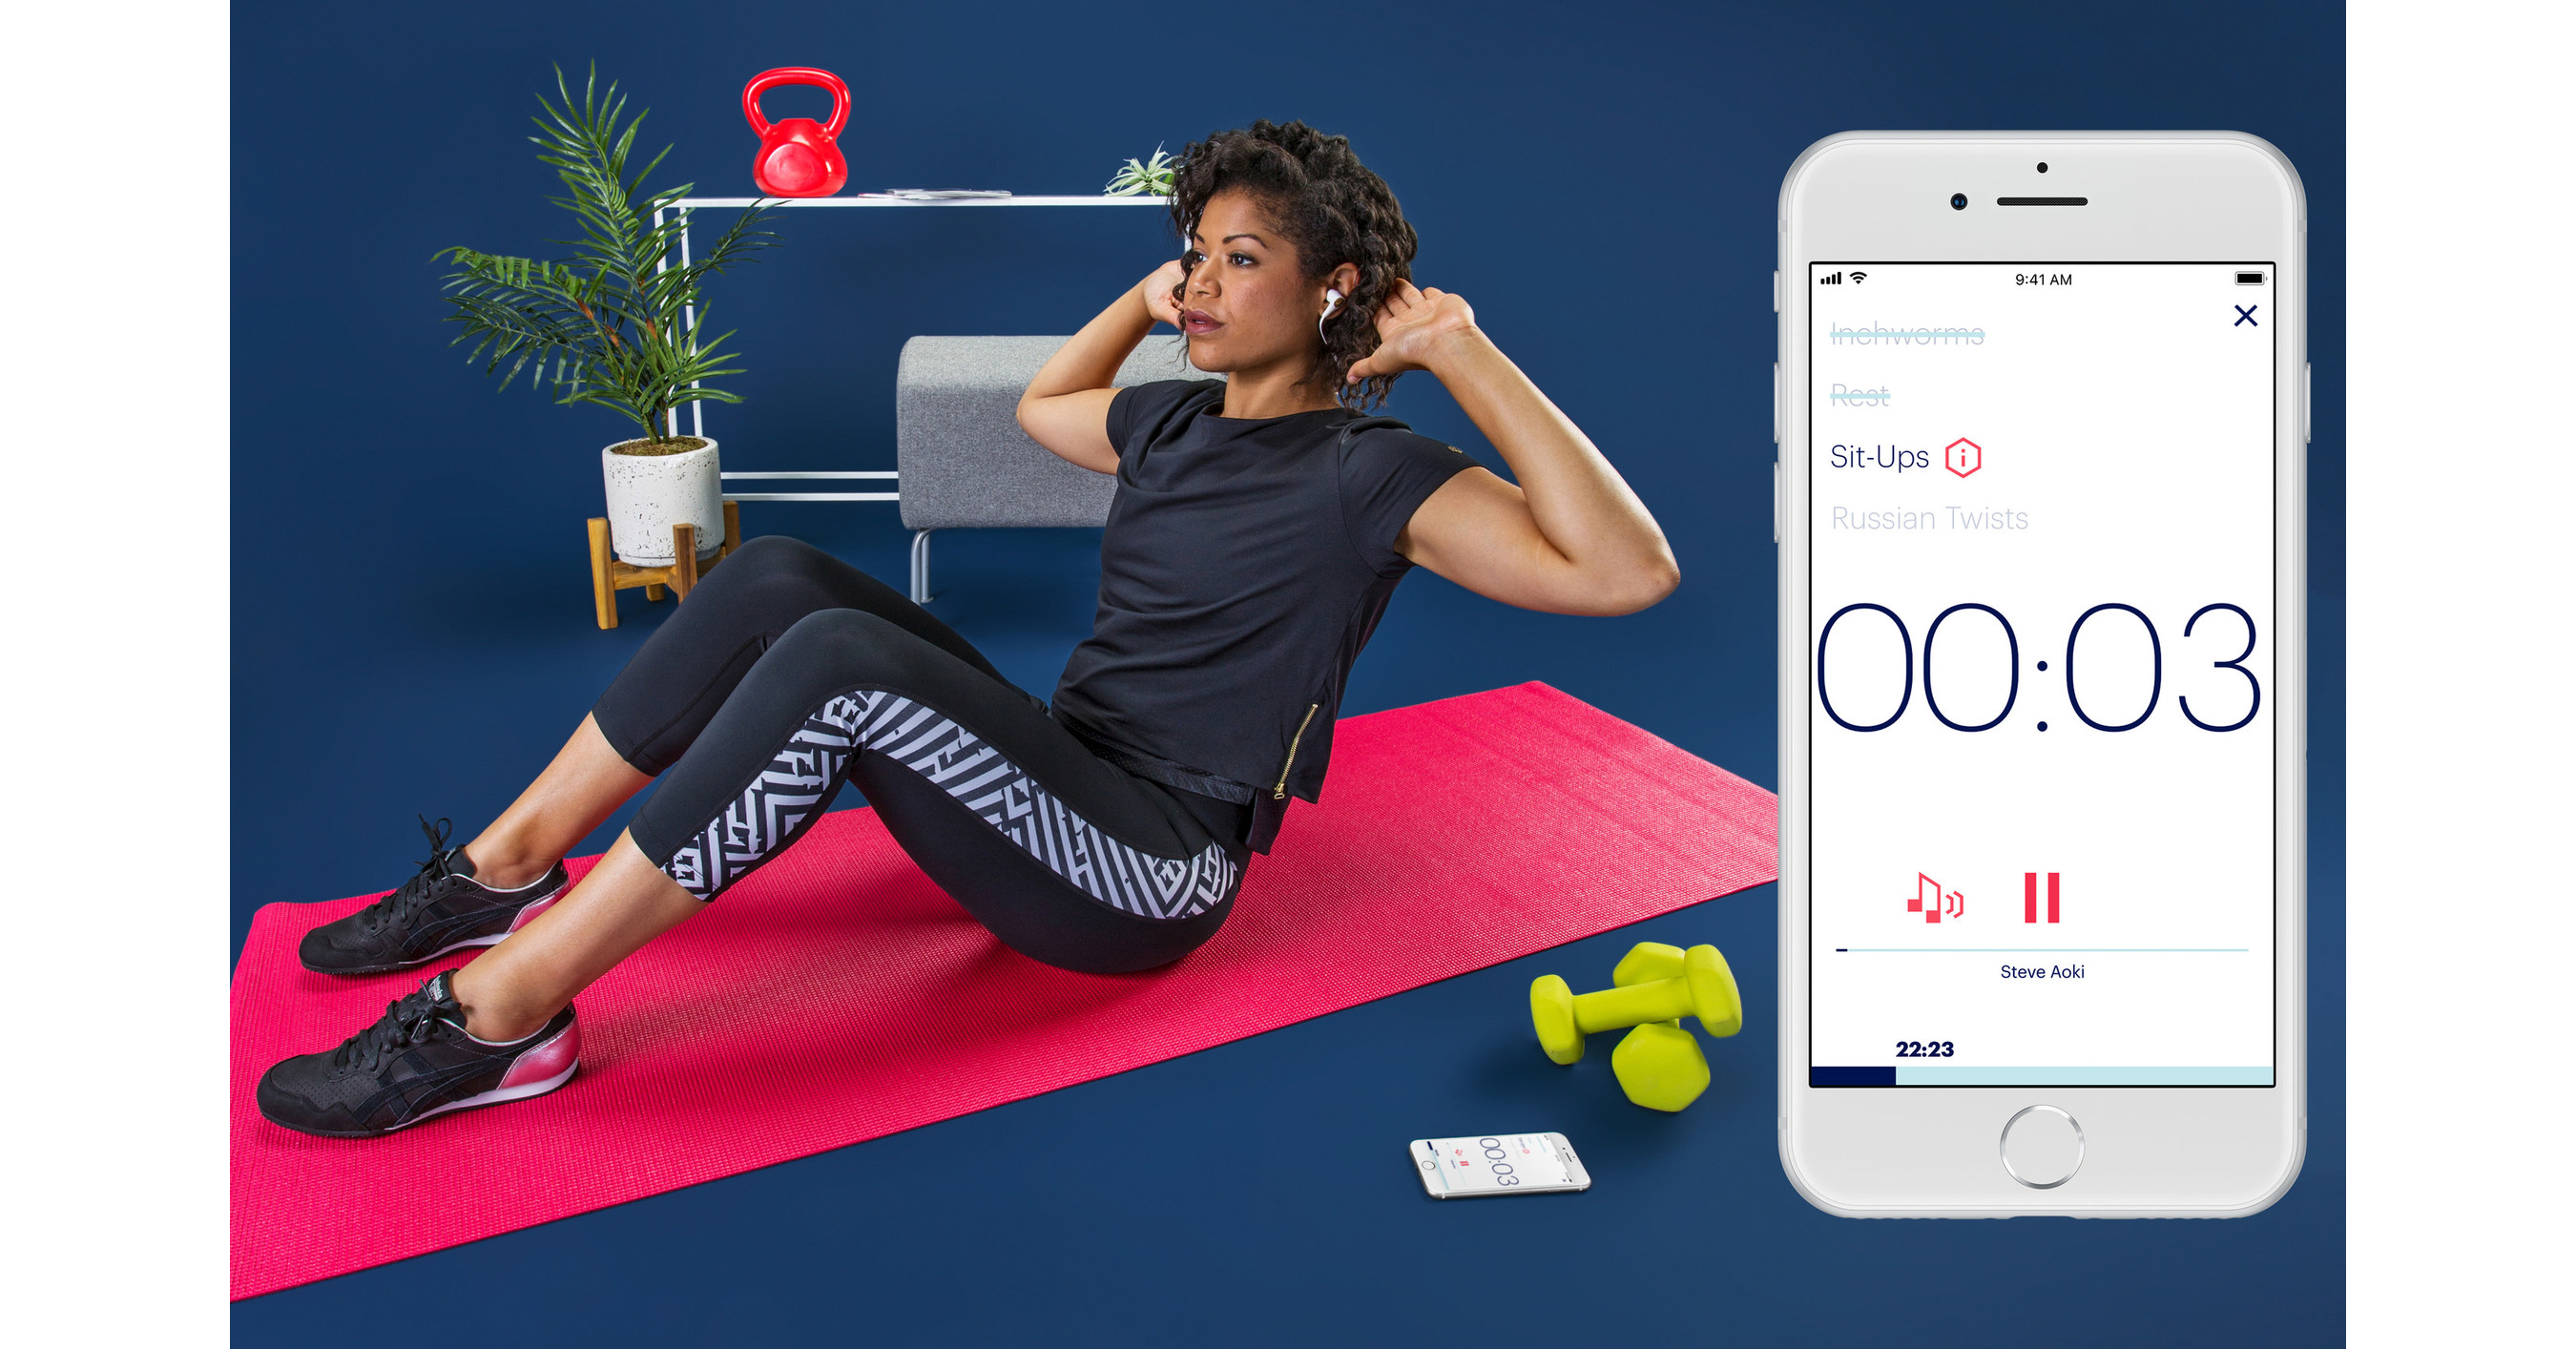 Introducing ASICS Studio™: An Audio App That Brings the Fitness-Class Experience to